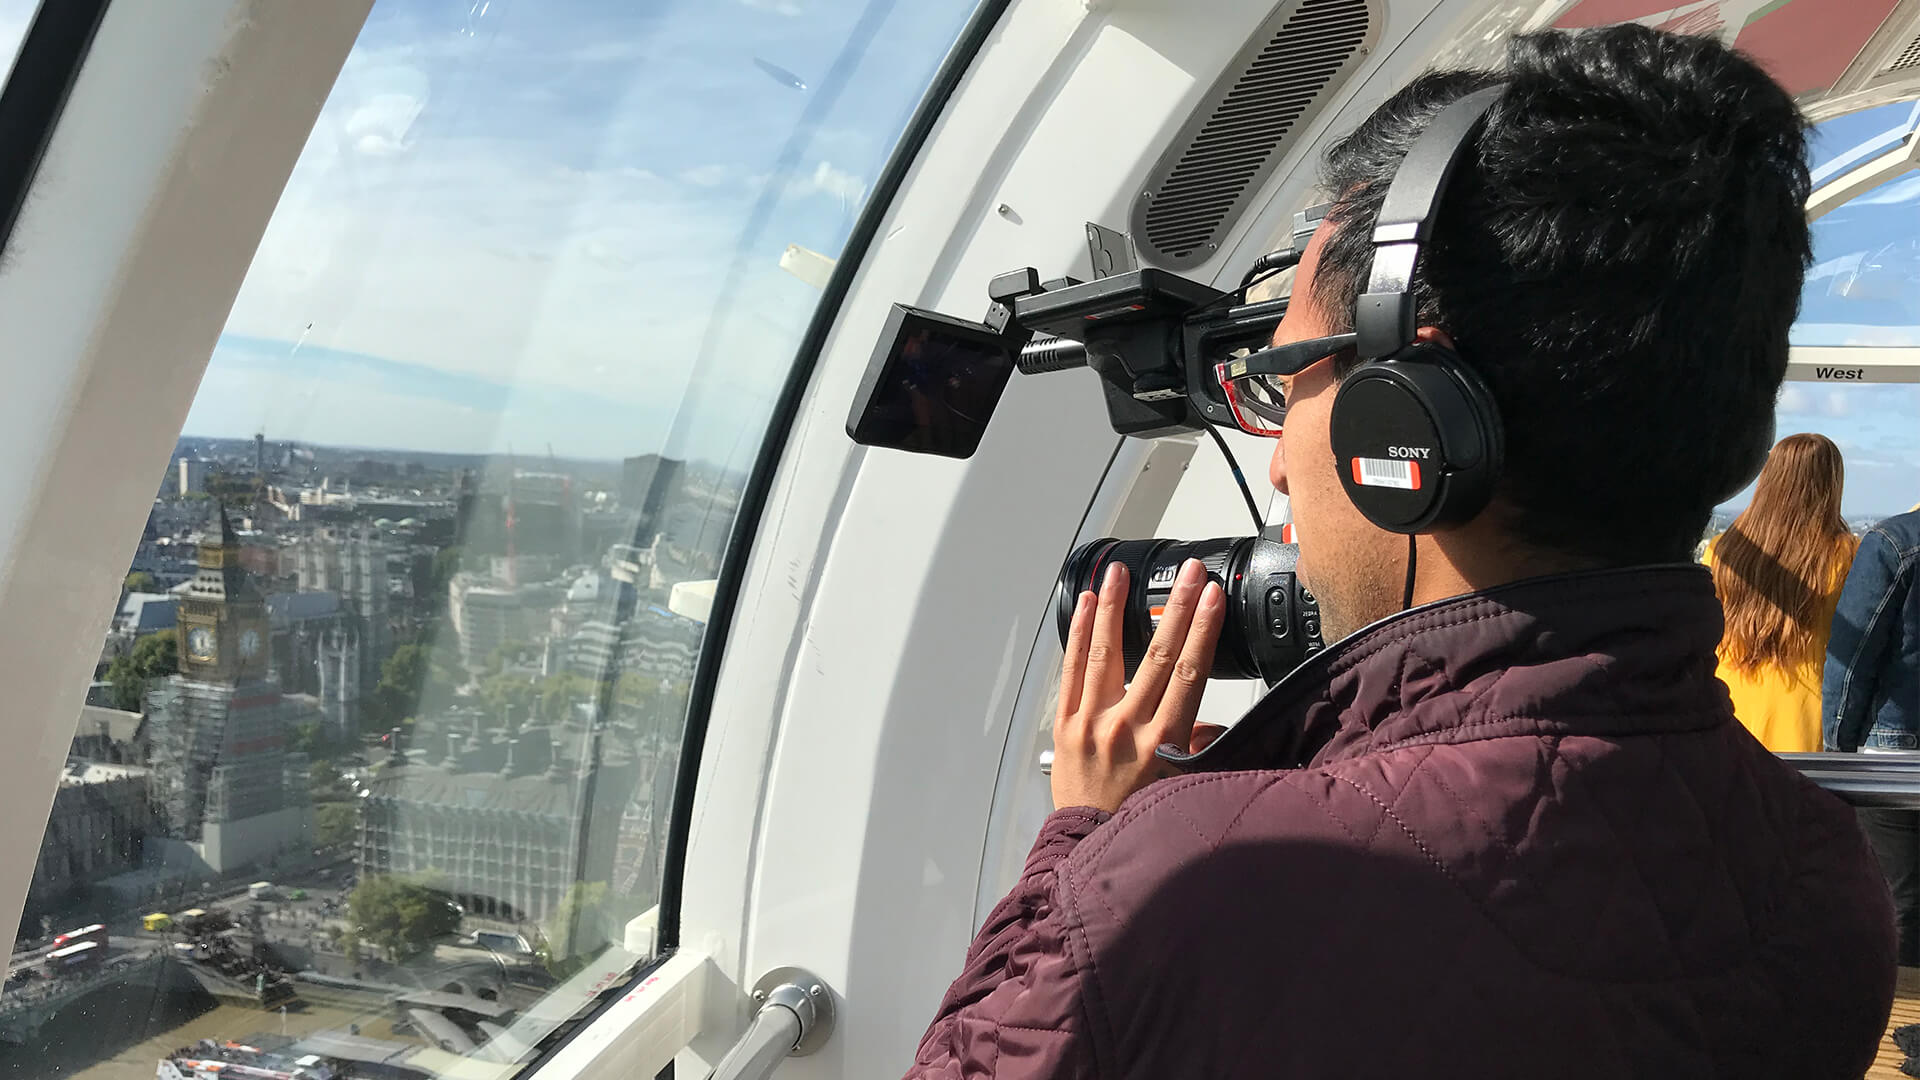 London eye pod filming with camera looking at stage entertainment